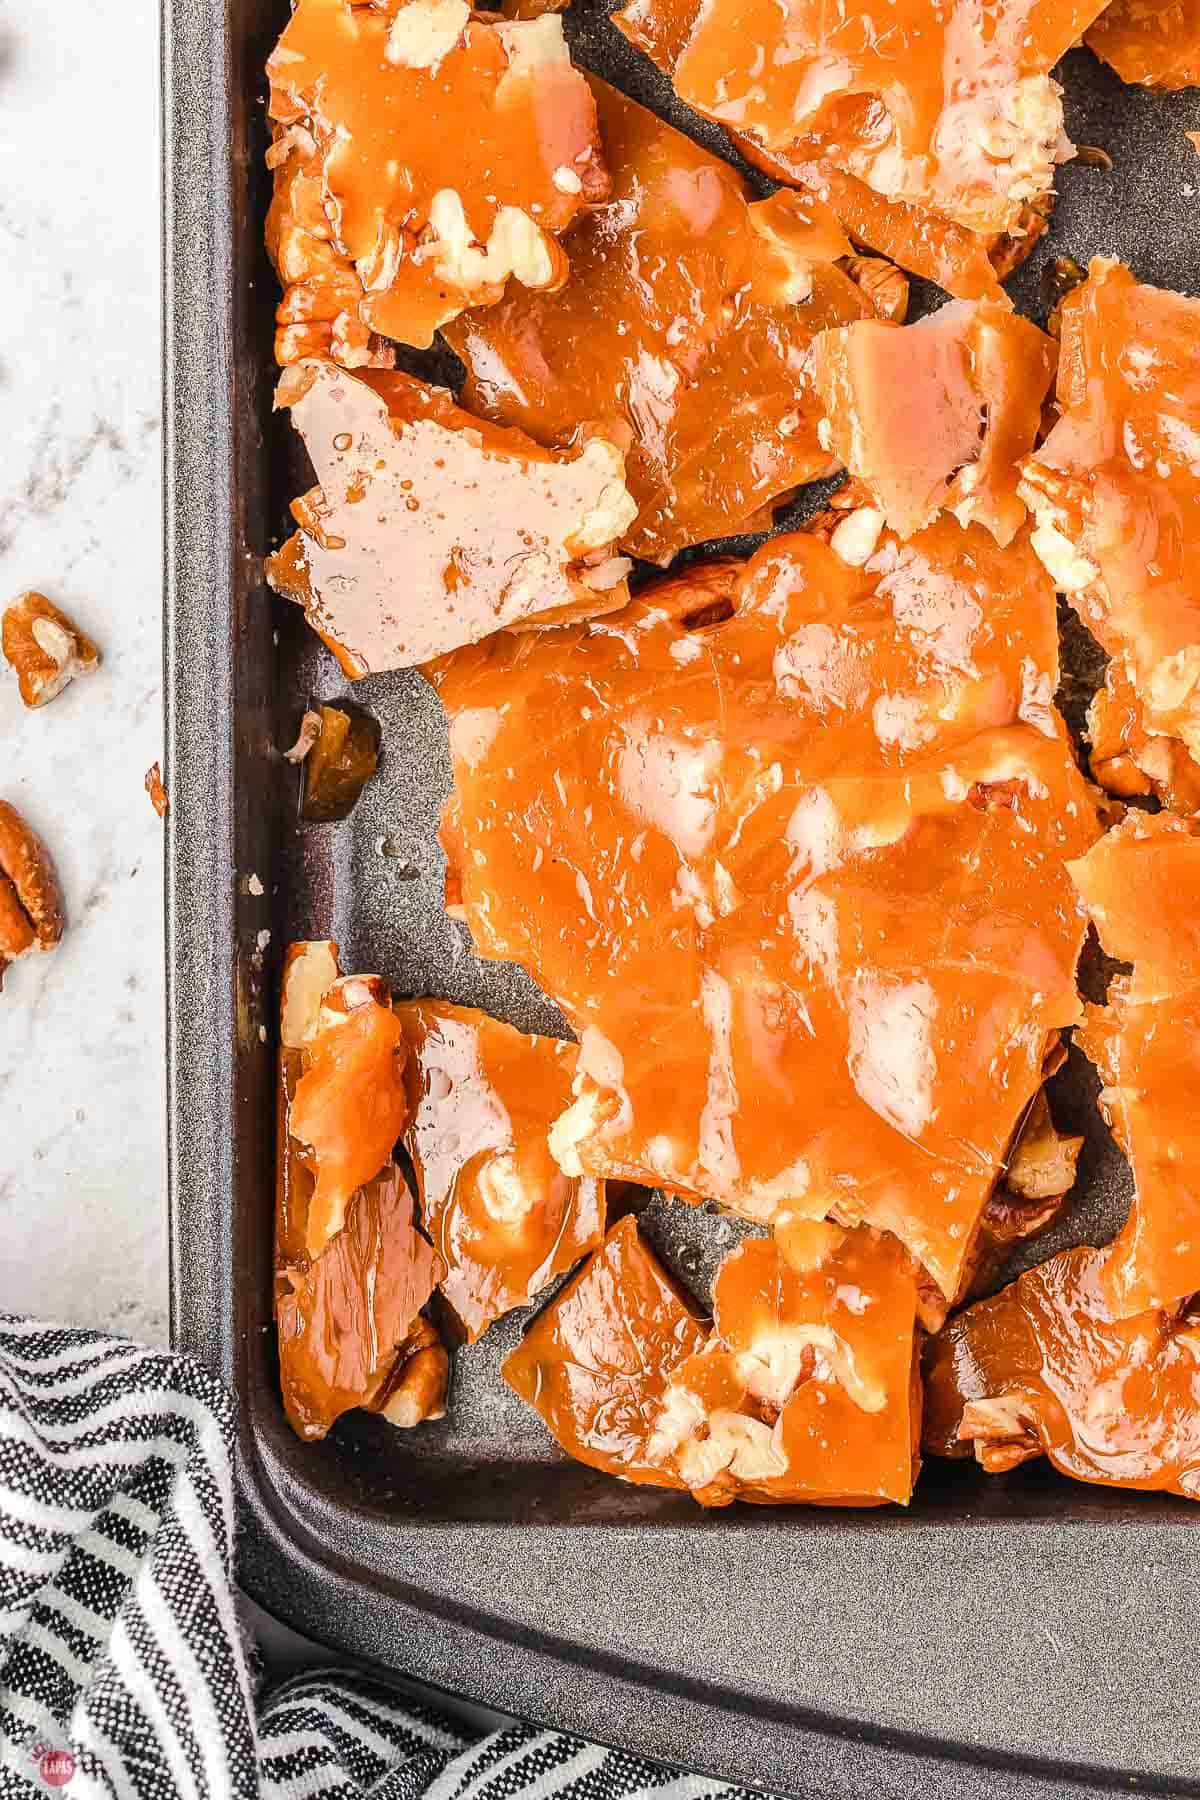 broken pieces of toffee on a baking sheet